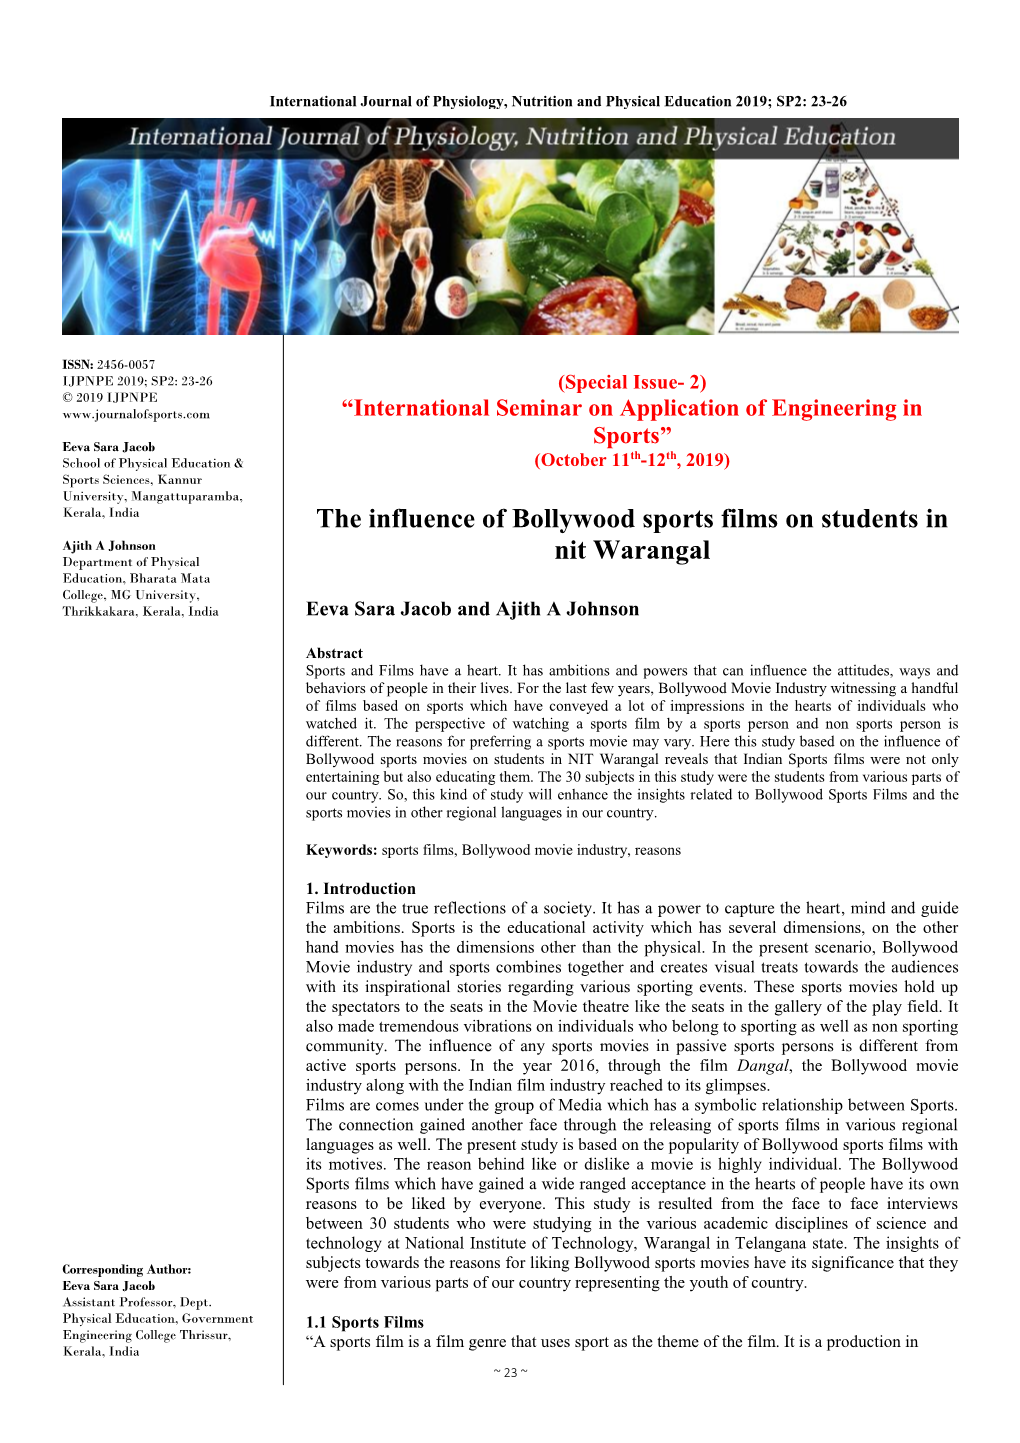 The Influence of Bollywood Sports Films on Students in Nit Warangal